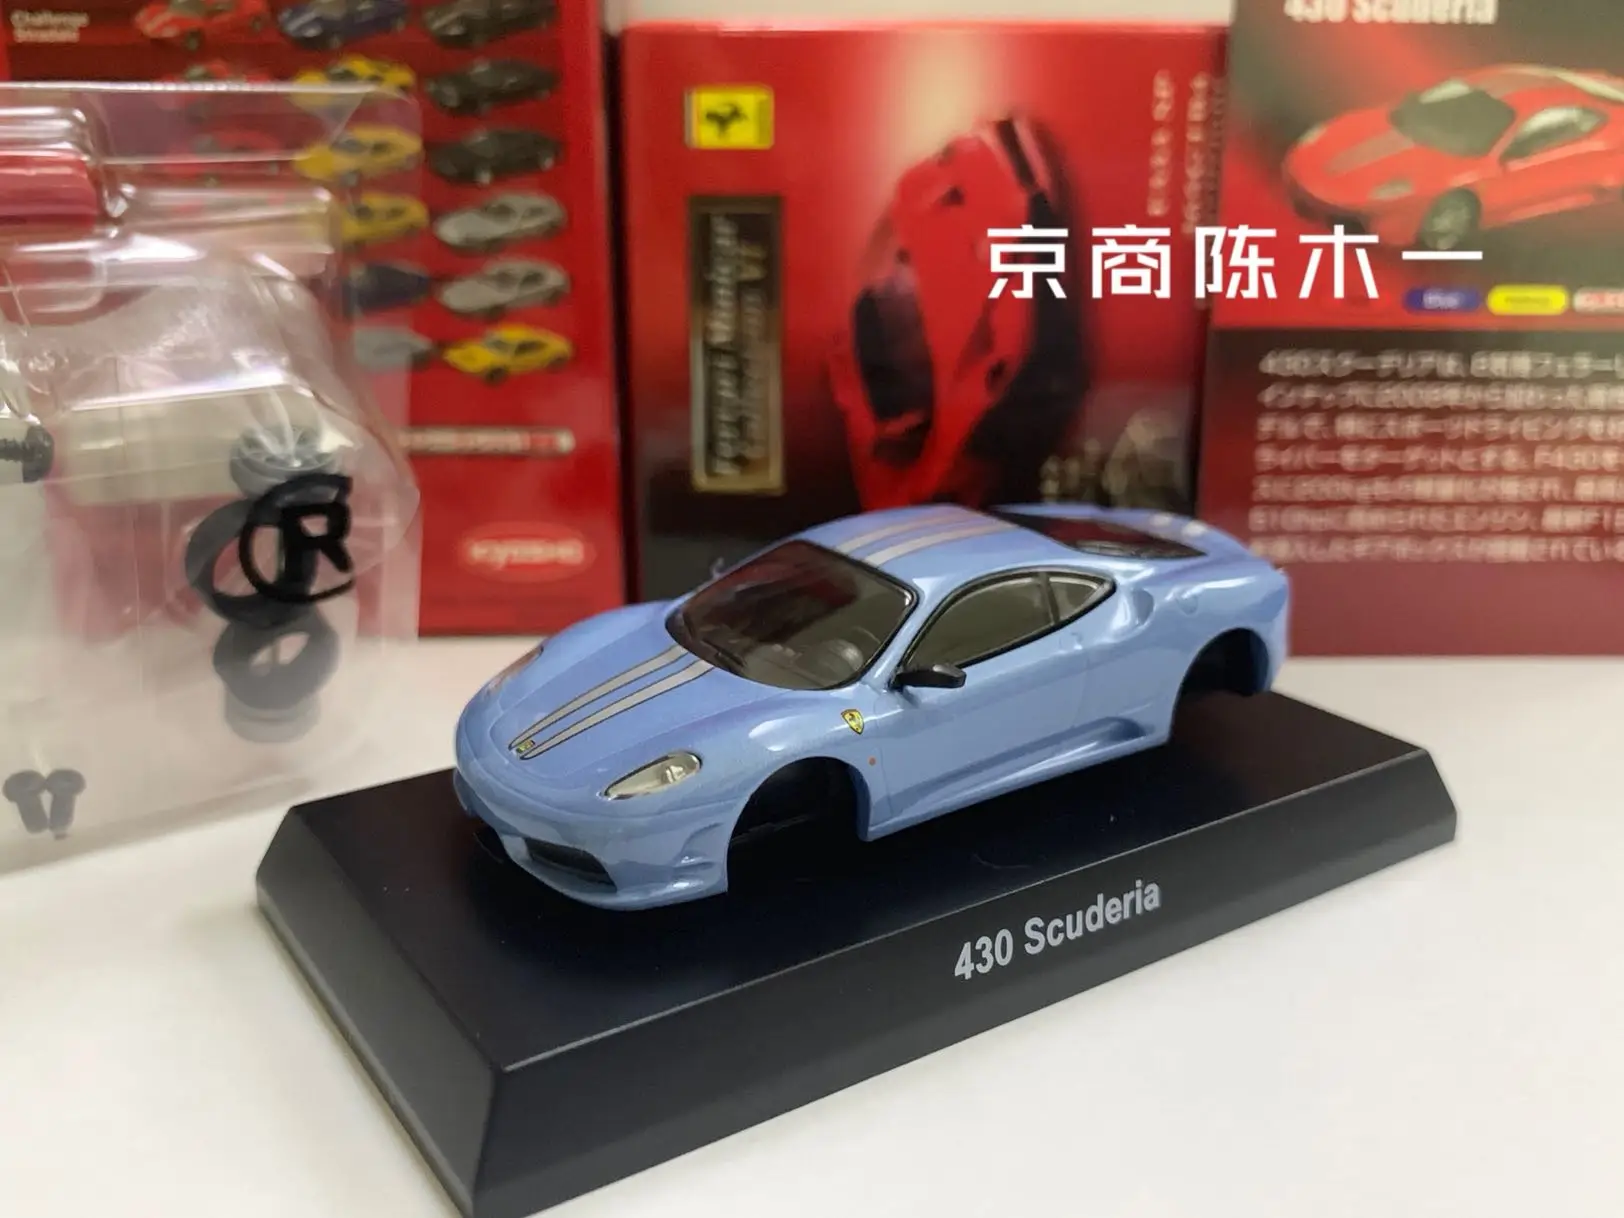 

1/64 KYOSHO Ferrari 430 Scuderia LM F1 RACING Collection of die-cast alloy assembled car decoration model toys